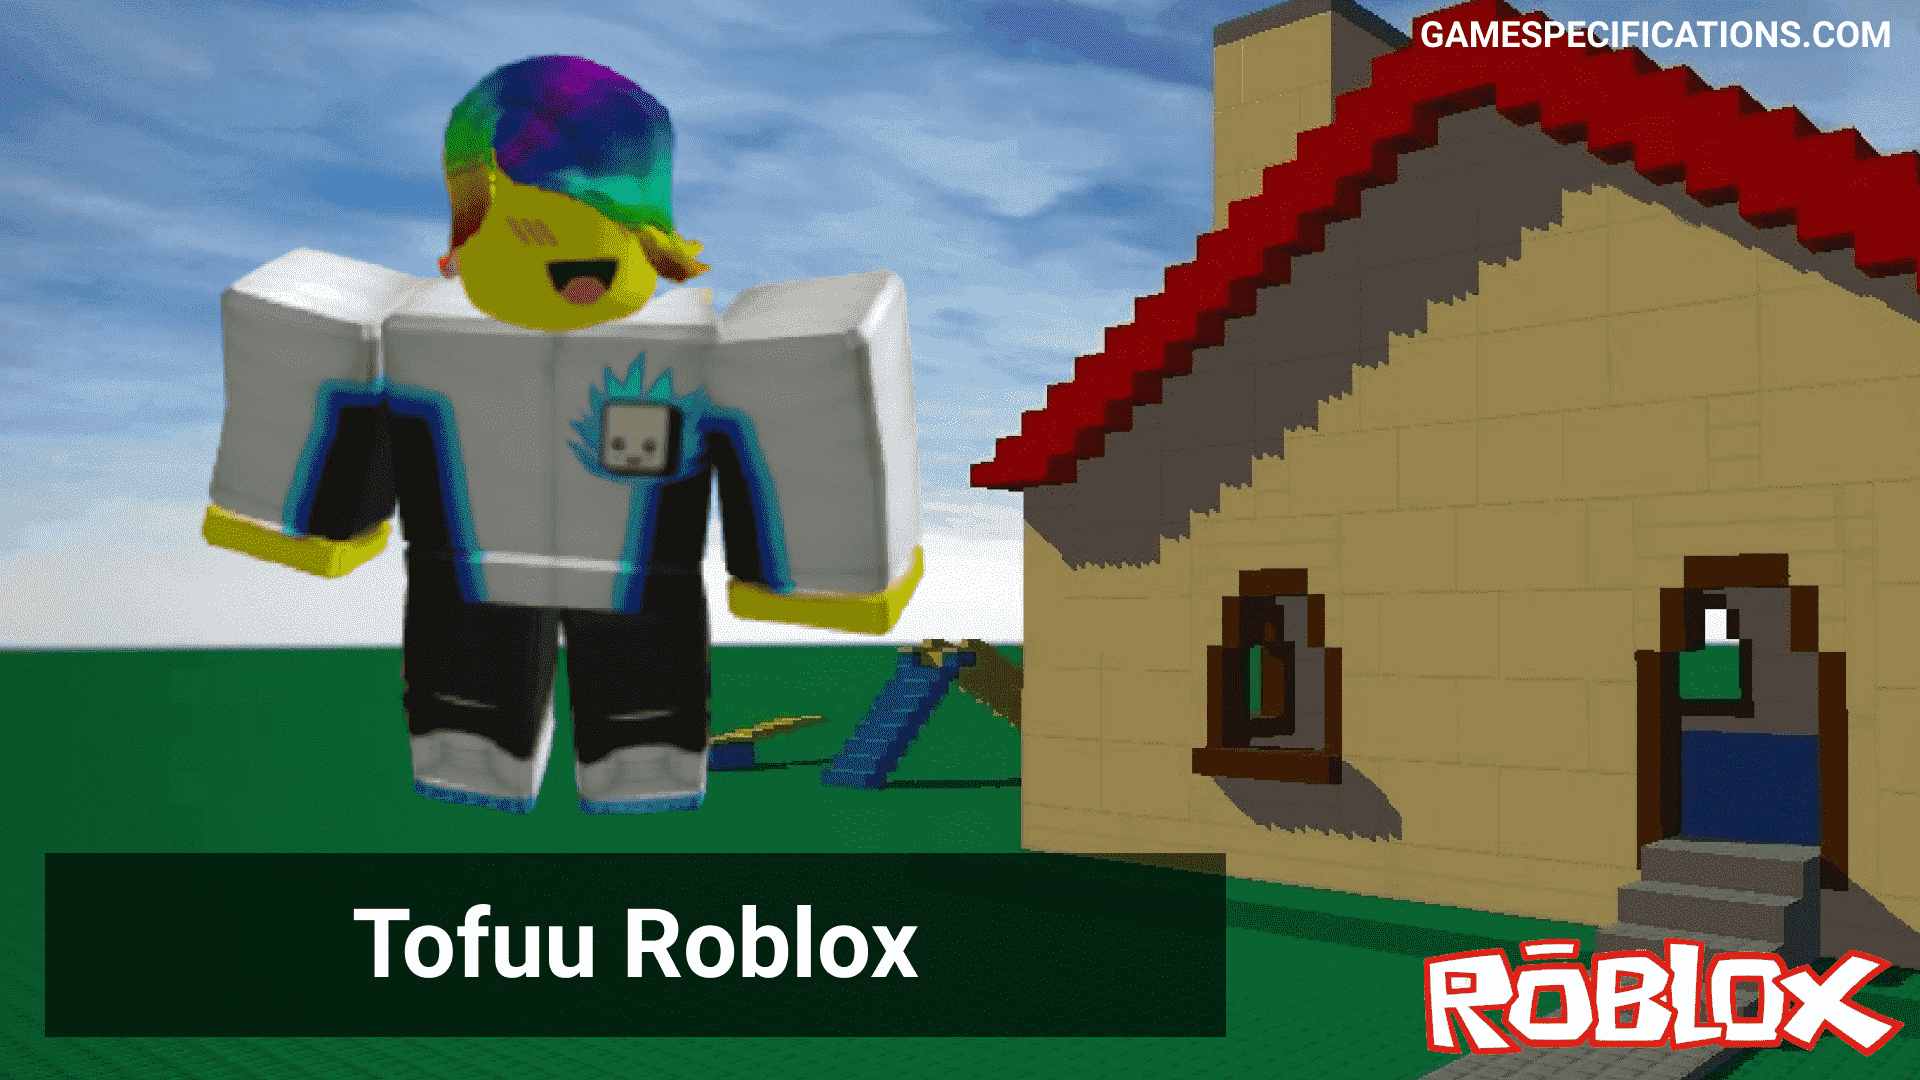 Tofuu Roblox S Top 10 Videos That Ll Make Your Life Awesome Game Specifications - roblox tofuu username